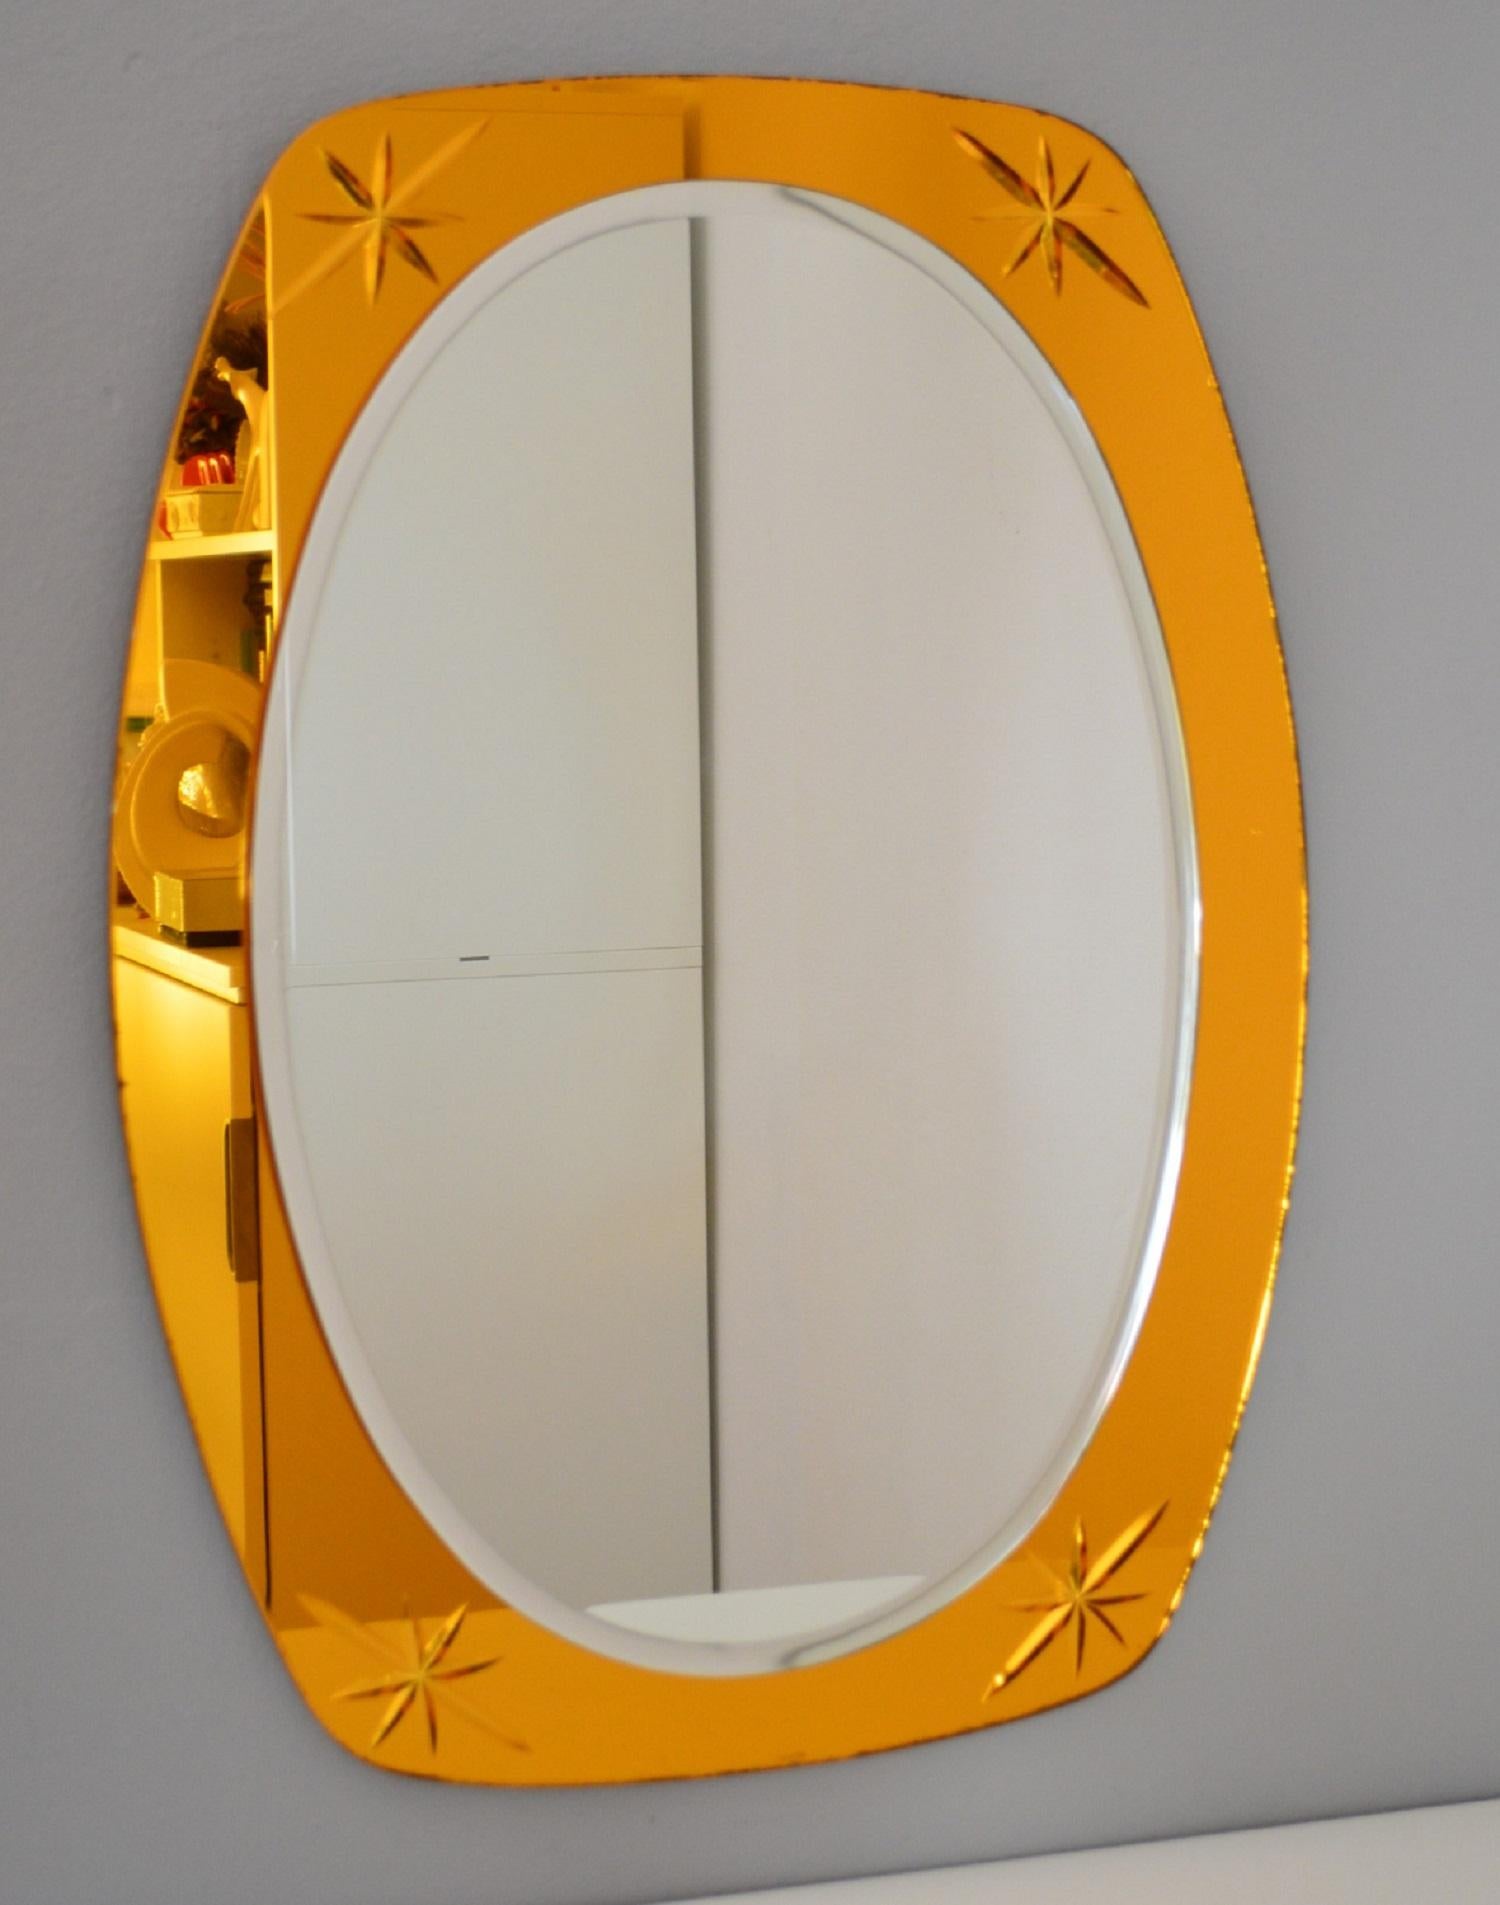 Mid-Century Modern Italian Midcentury Crystal Glass Wall Mirror in Golden Yellow Color, 1960s